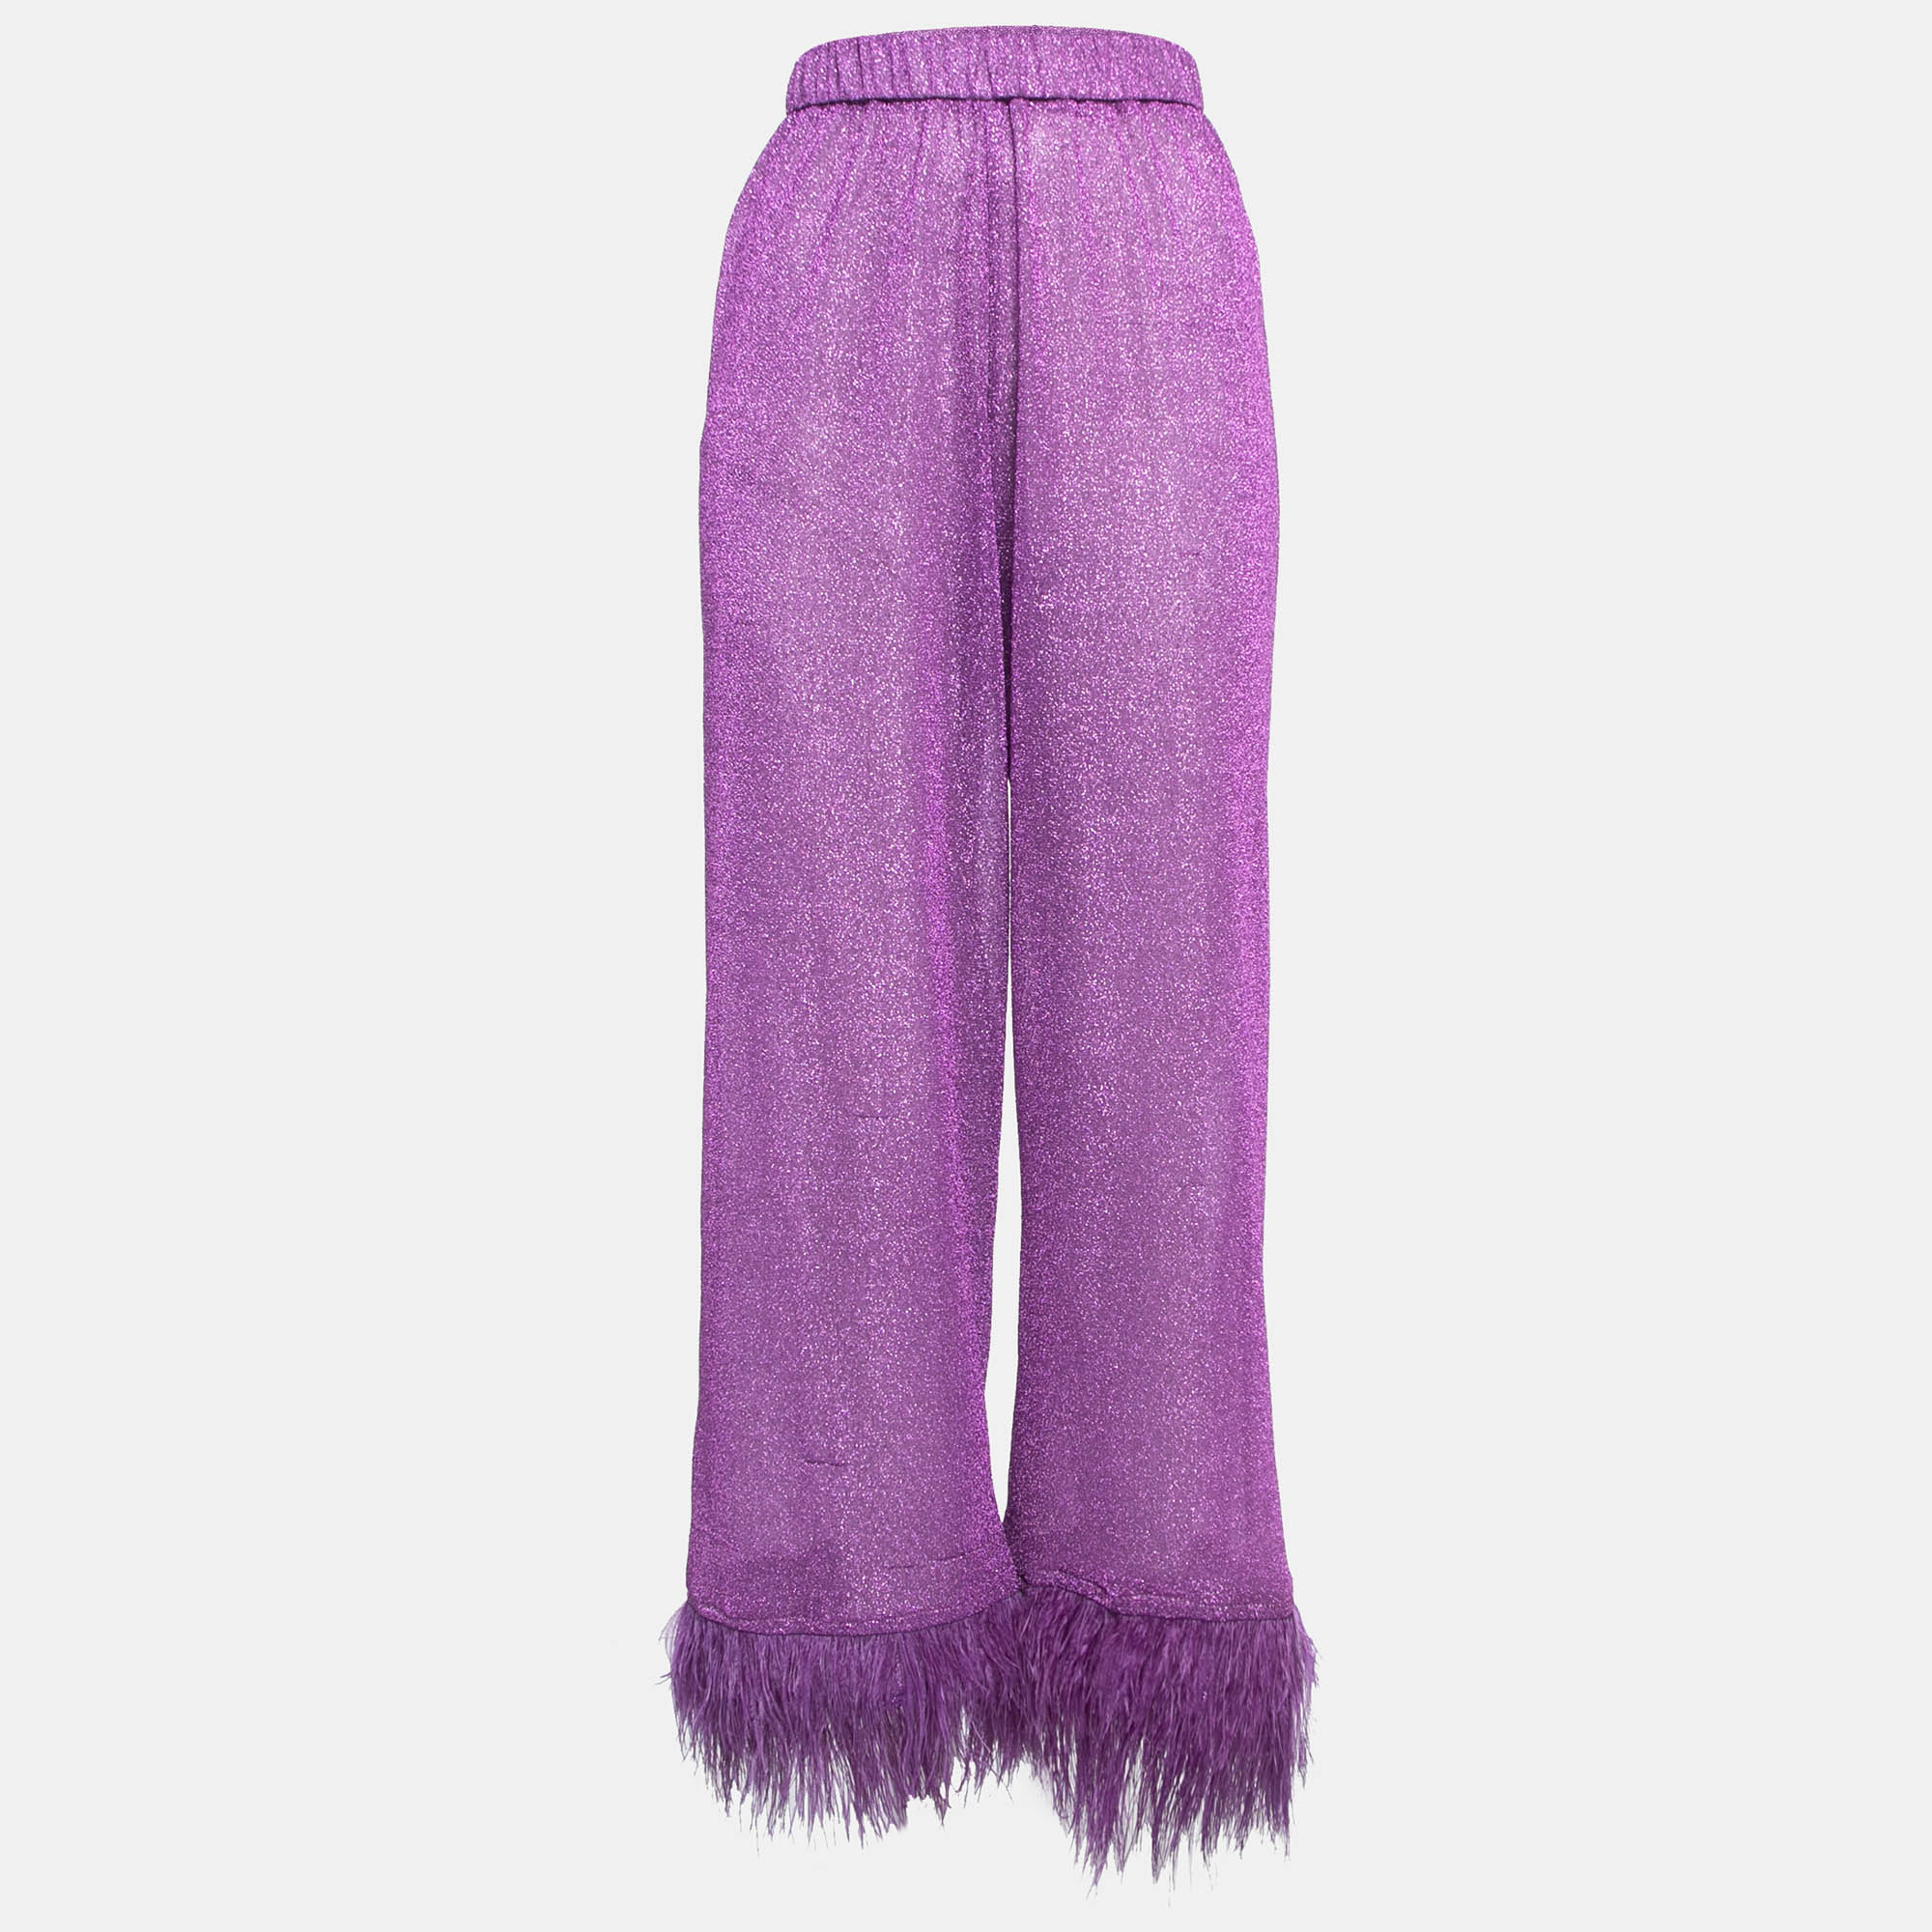 Oseree purple lurex knit feather trim sheer trousers s